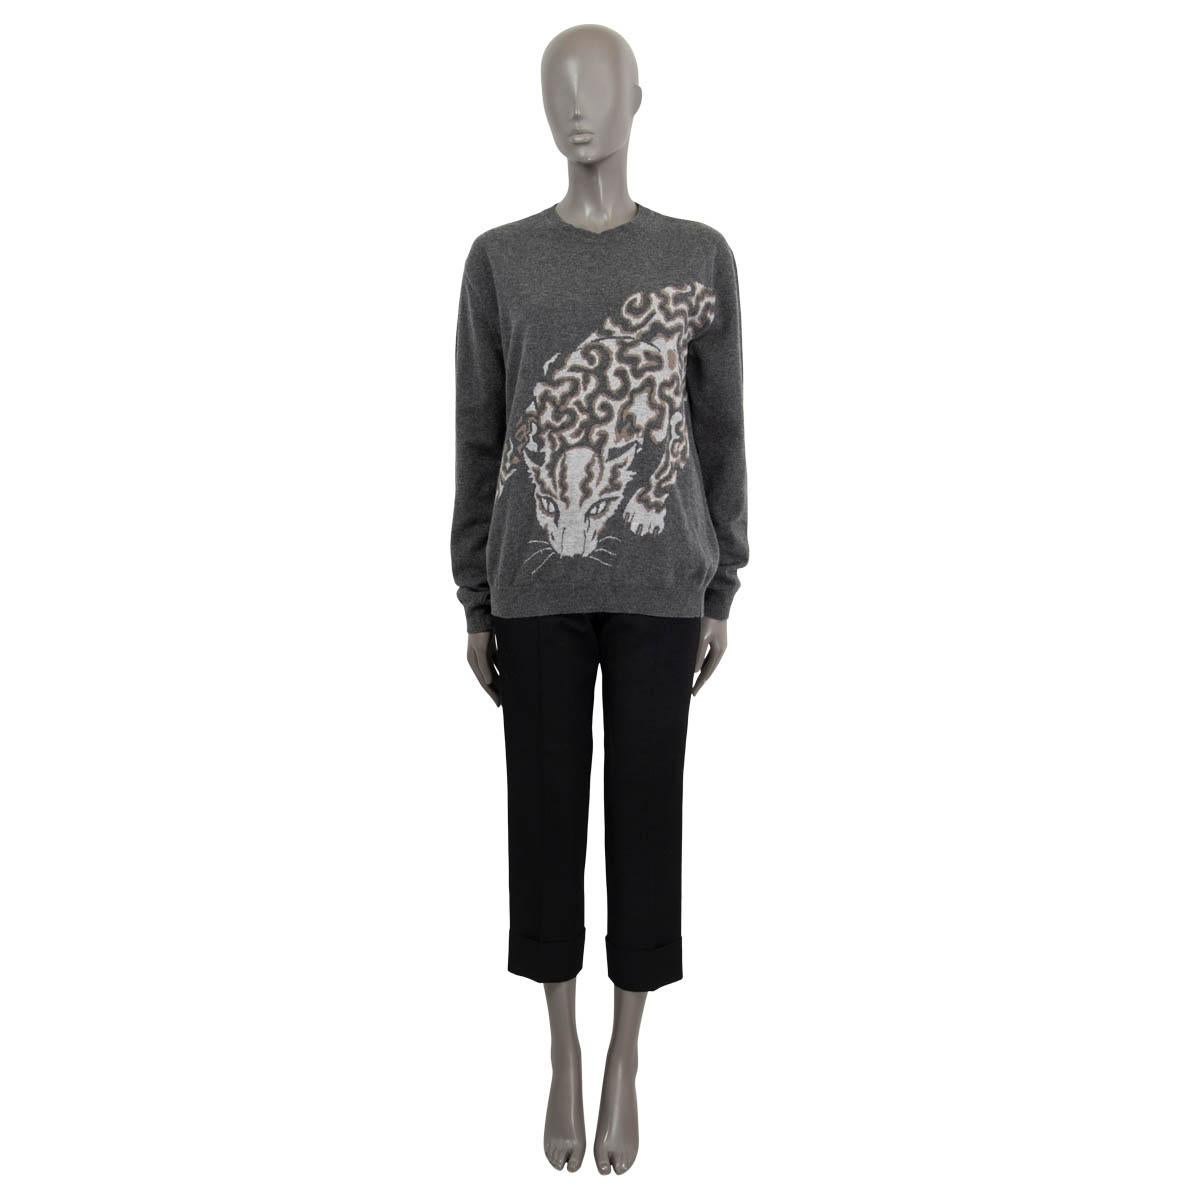 100% authentic Stella McCartney oversized fine-knit sweater in gray wool (100%). Features panther print in light gray and taupe with a round neck. Has been worn and is in excellent condition.

Measurements
Tag Size	40
Size	S
Shoulder Width	48cm